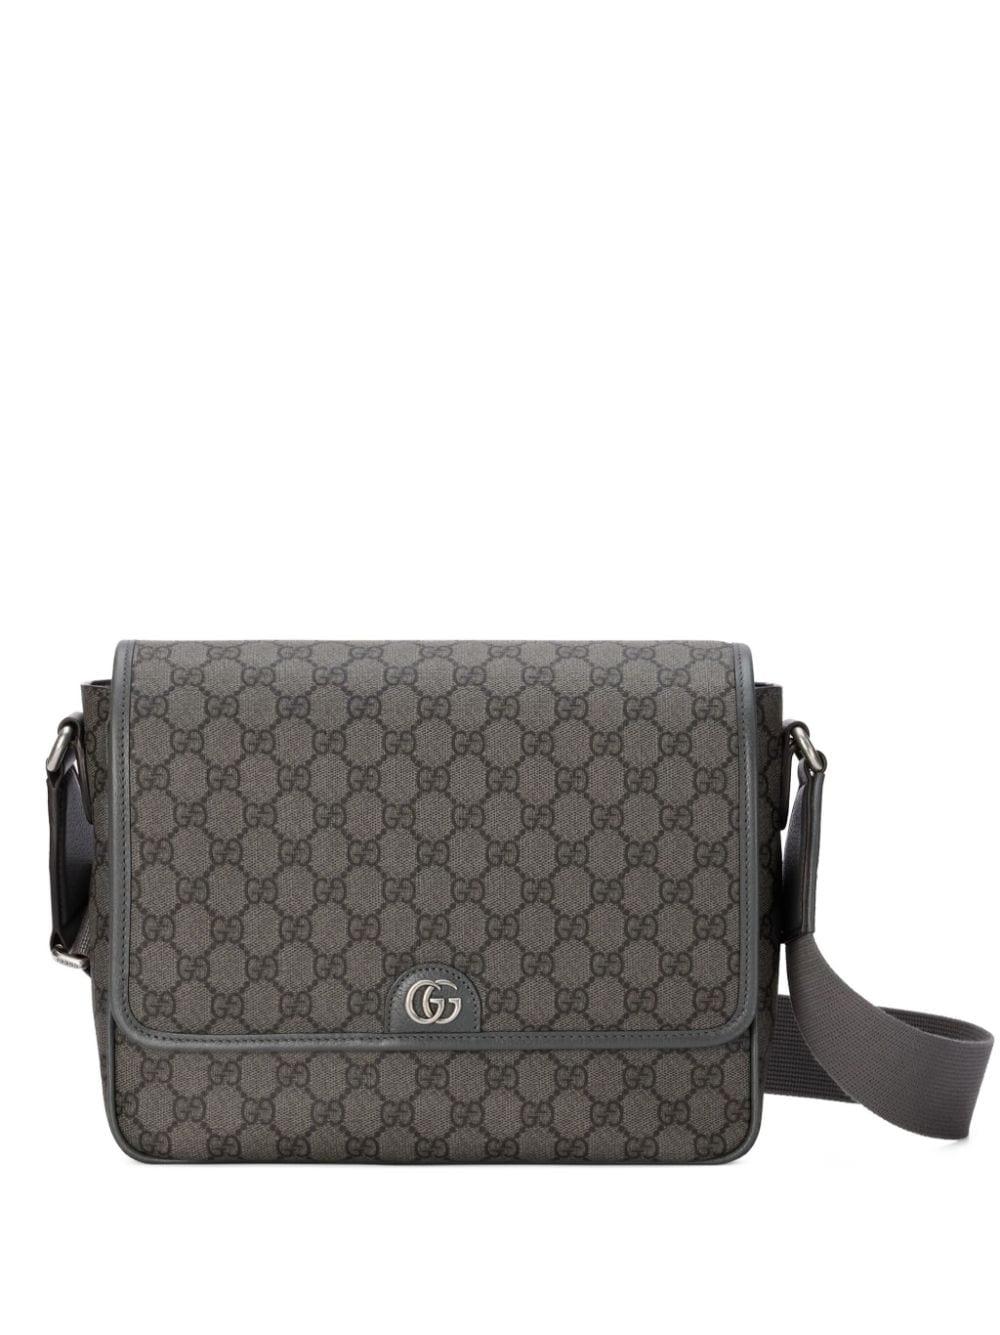 Gucci Ophidia GG Supreme Canvas Messenger Bag in Gray for Men